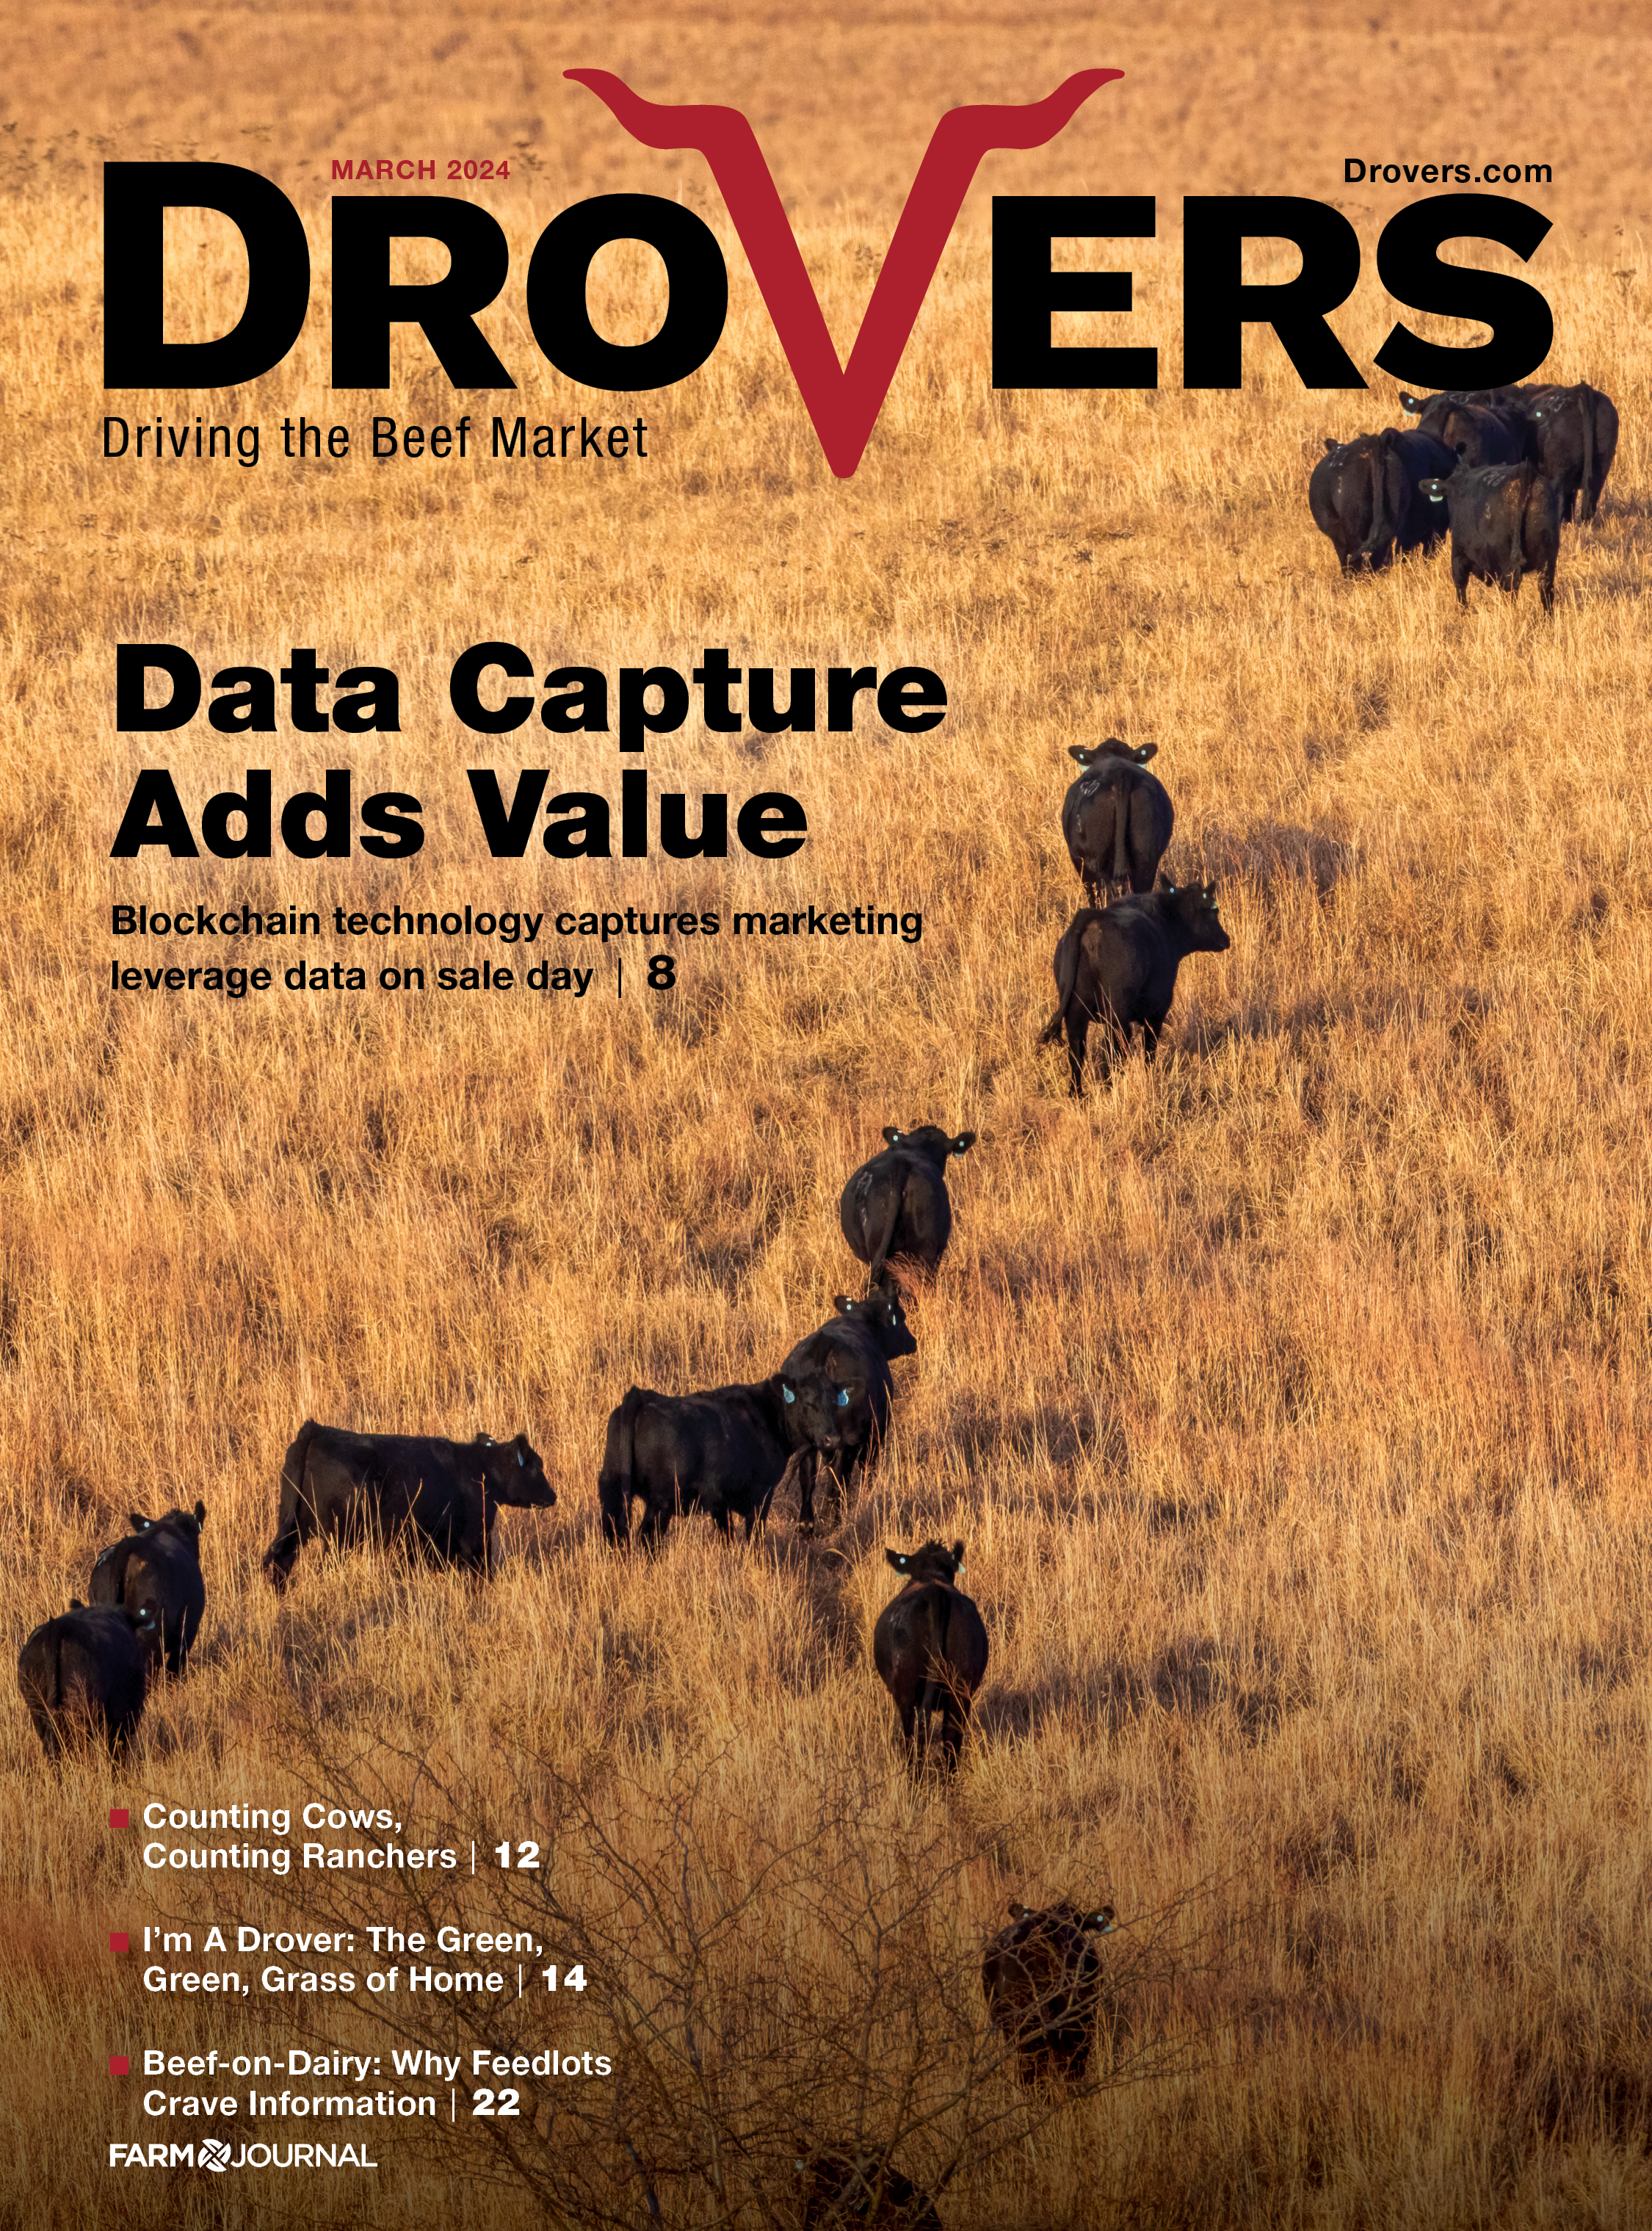  Drovers March 2024 Cover 